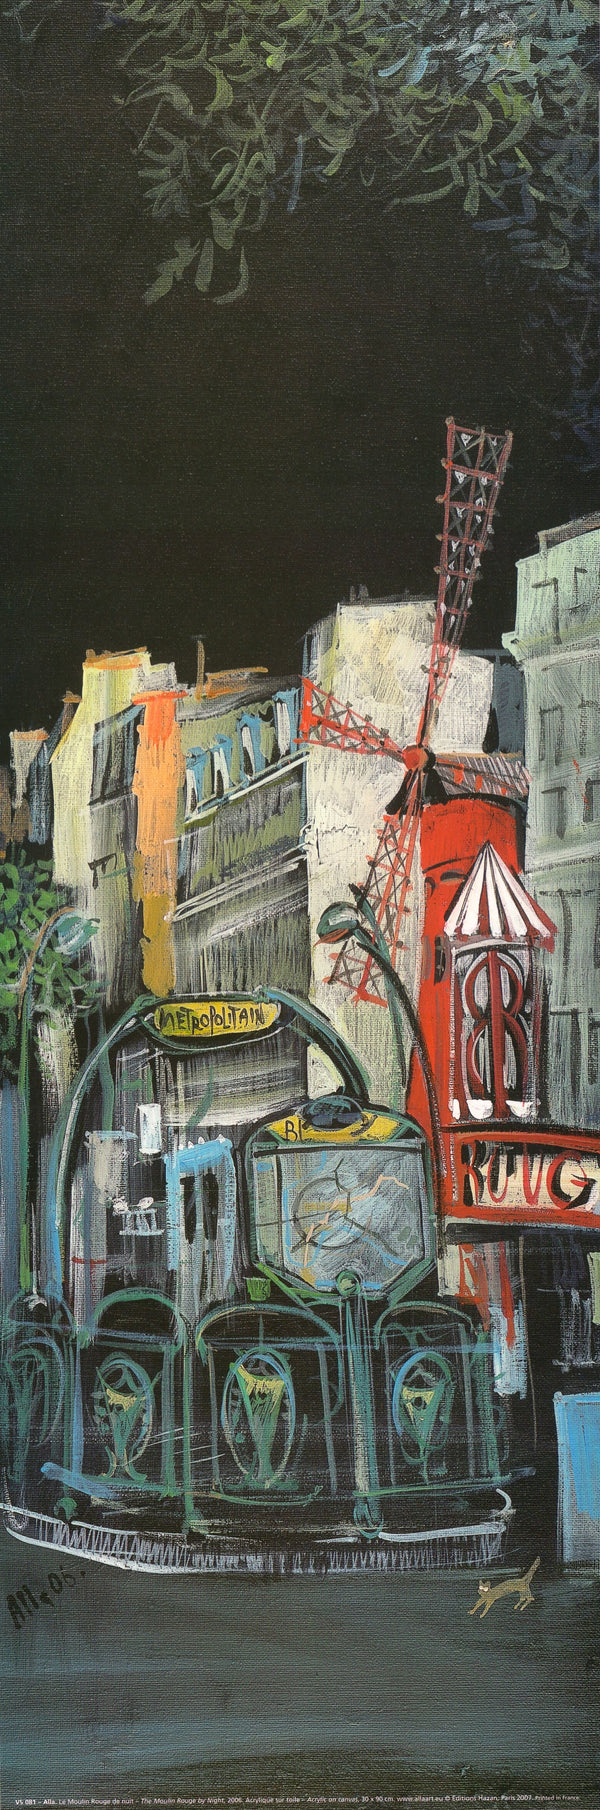 The Moulin Rouge by Night, 2006 by Alla - 8 X 24 Inches (Art Print)